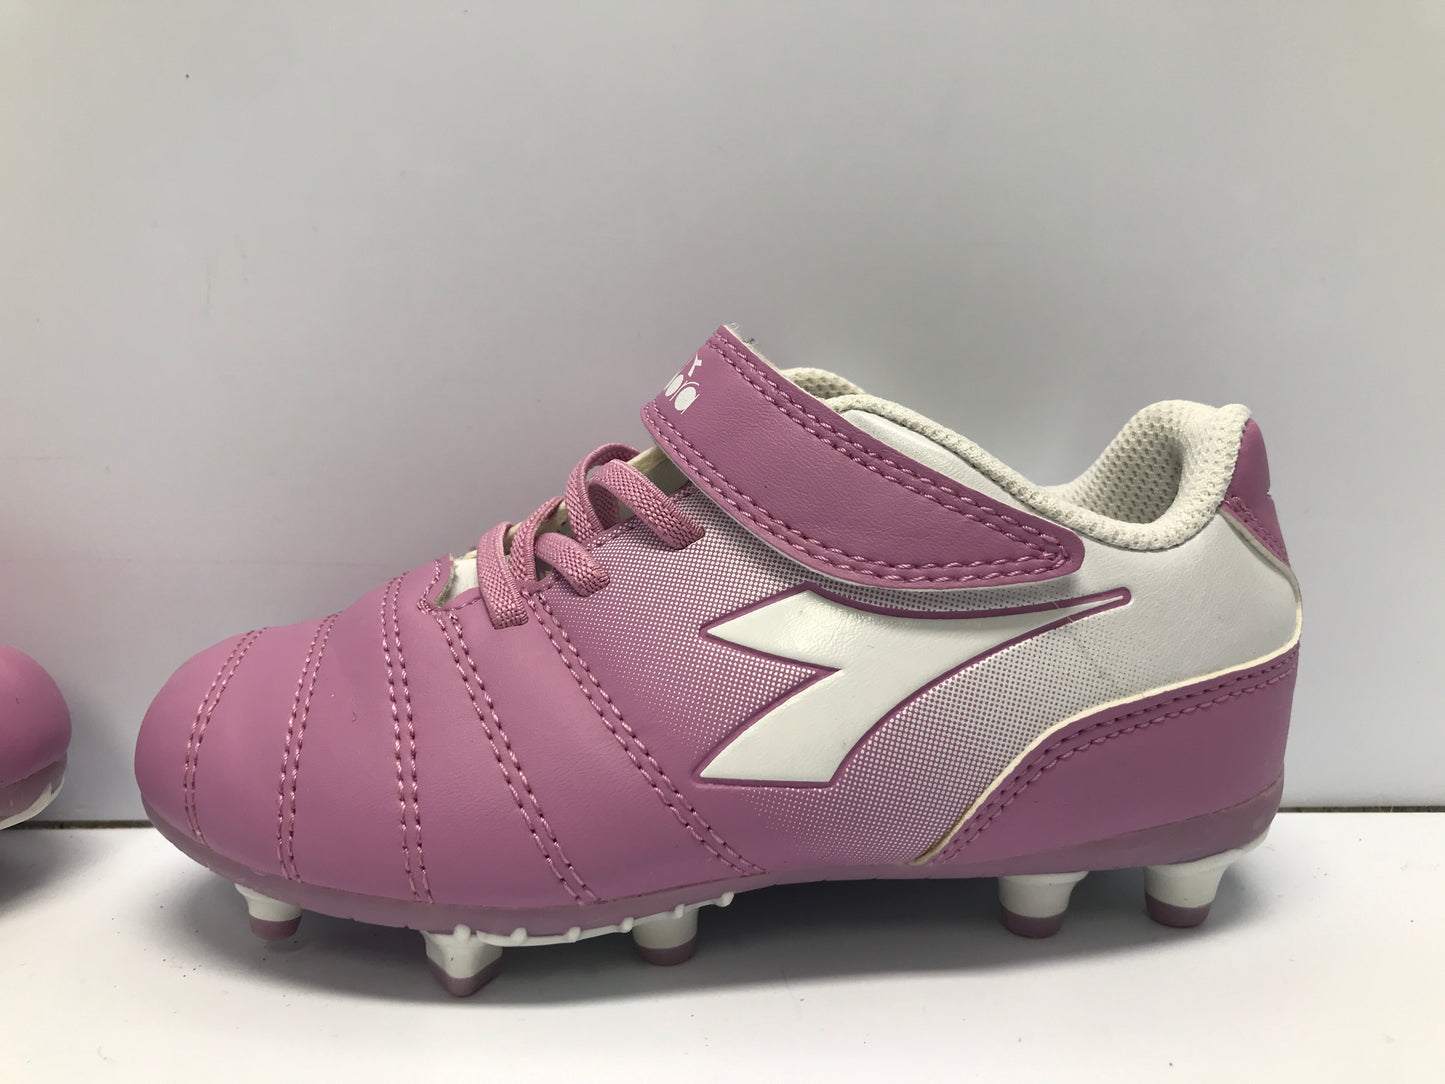 Soccer Shoes Cleats Child Size 11 Diadora Pink White Like New